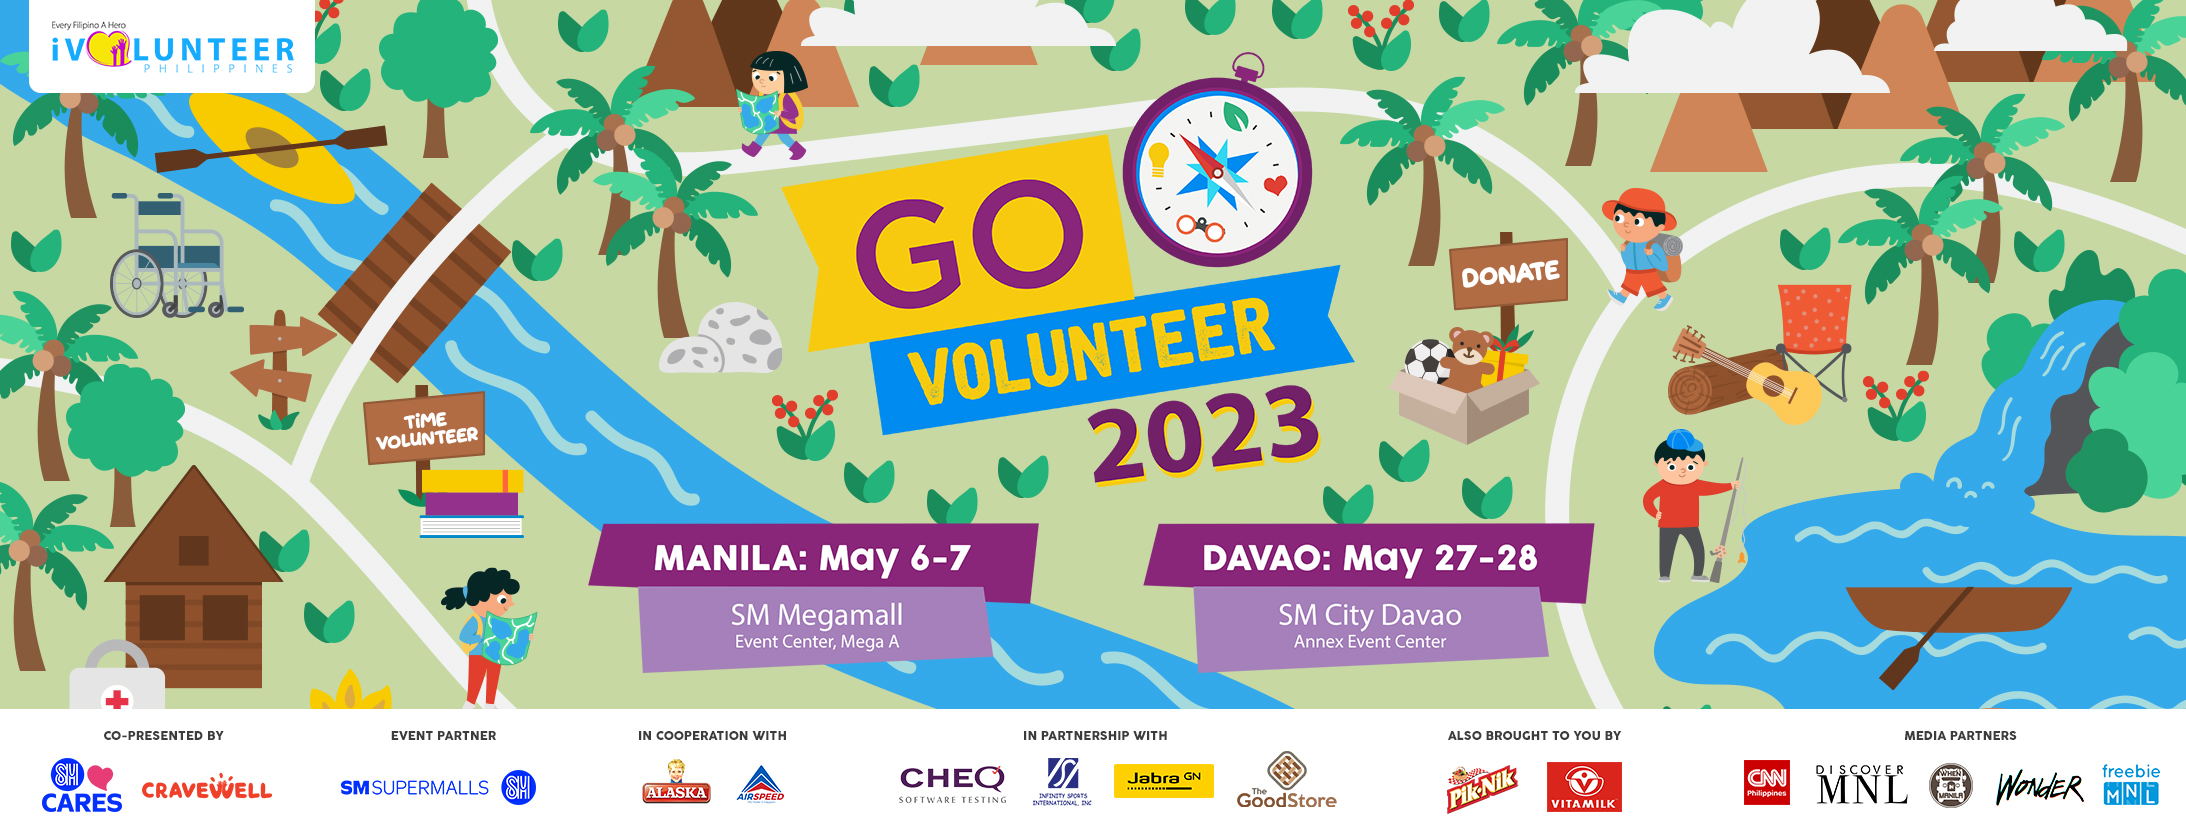 Things to do May 2023 - Go Volunteer 2023